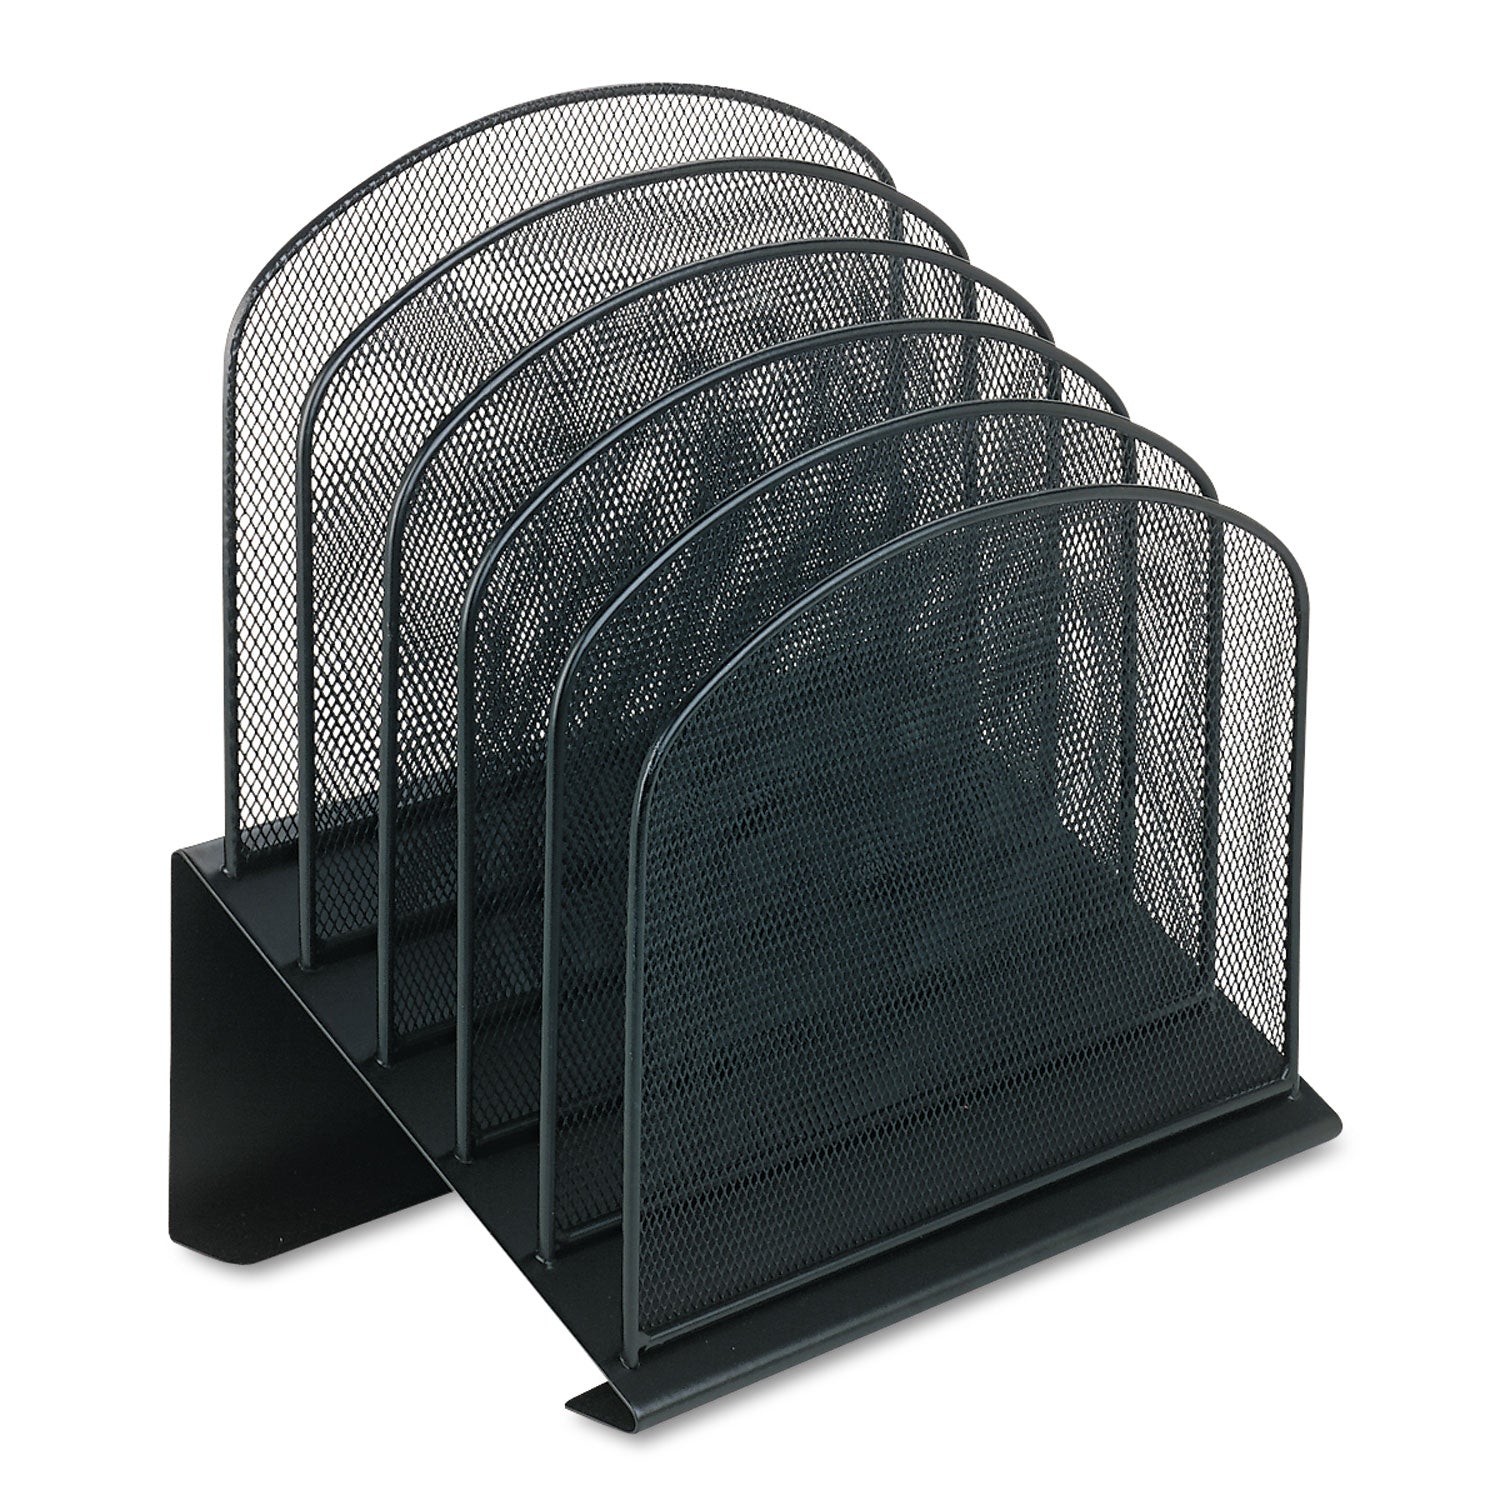 Onyx Mesh Desk Organizer with Tiered Sections, 5 Sections, Letter to Legal Size Files, 11.25" x 7.25" x 12", Black - 